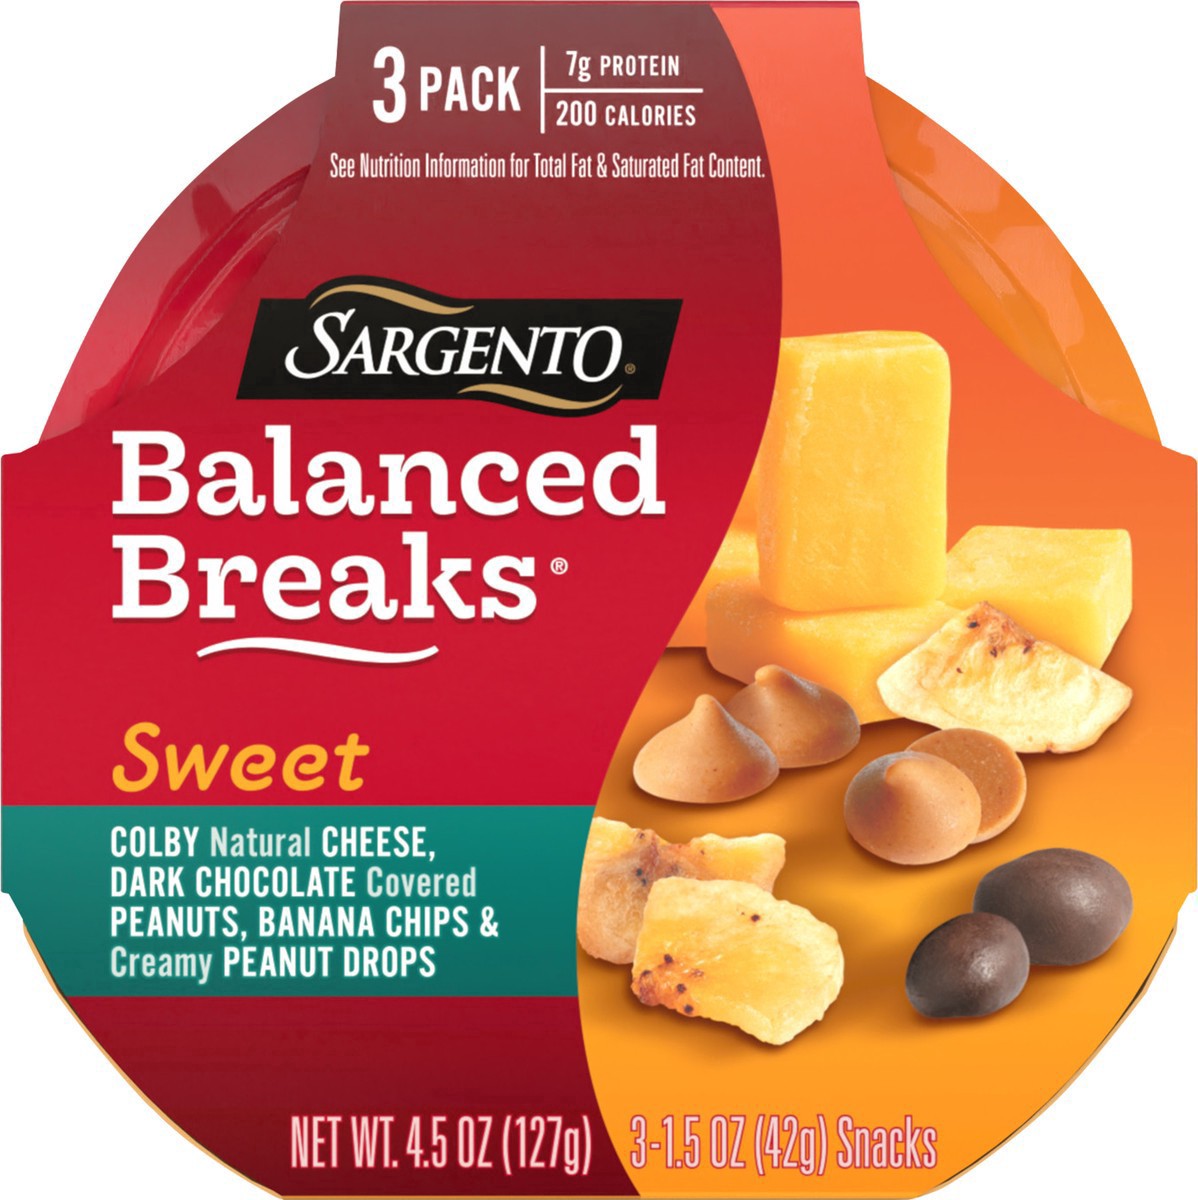 slide 13 of 17, Sargento Sweet Balanced Breaks with Colby Natural Cheese, Dark Chocolate Covered Peanuts, Banana Chips and Creamy Peanut Drops, 1.5 oz., 3-Pack, 4.5 oz